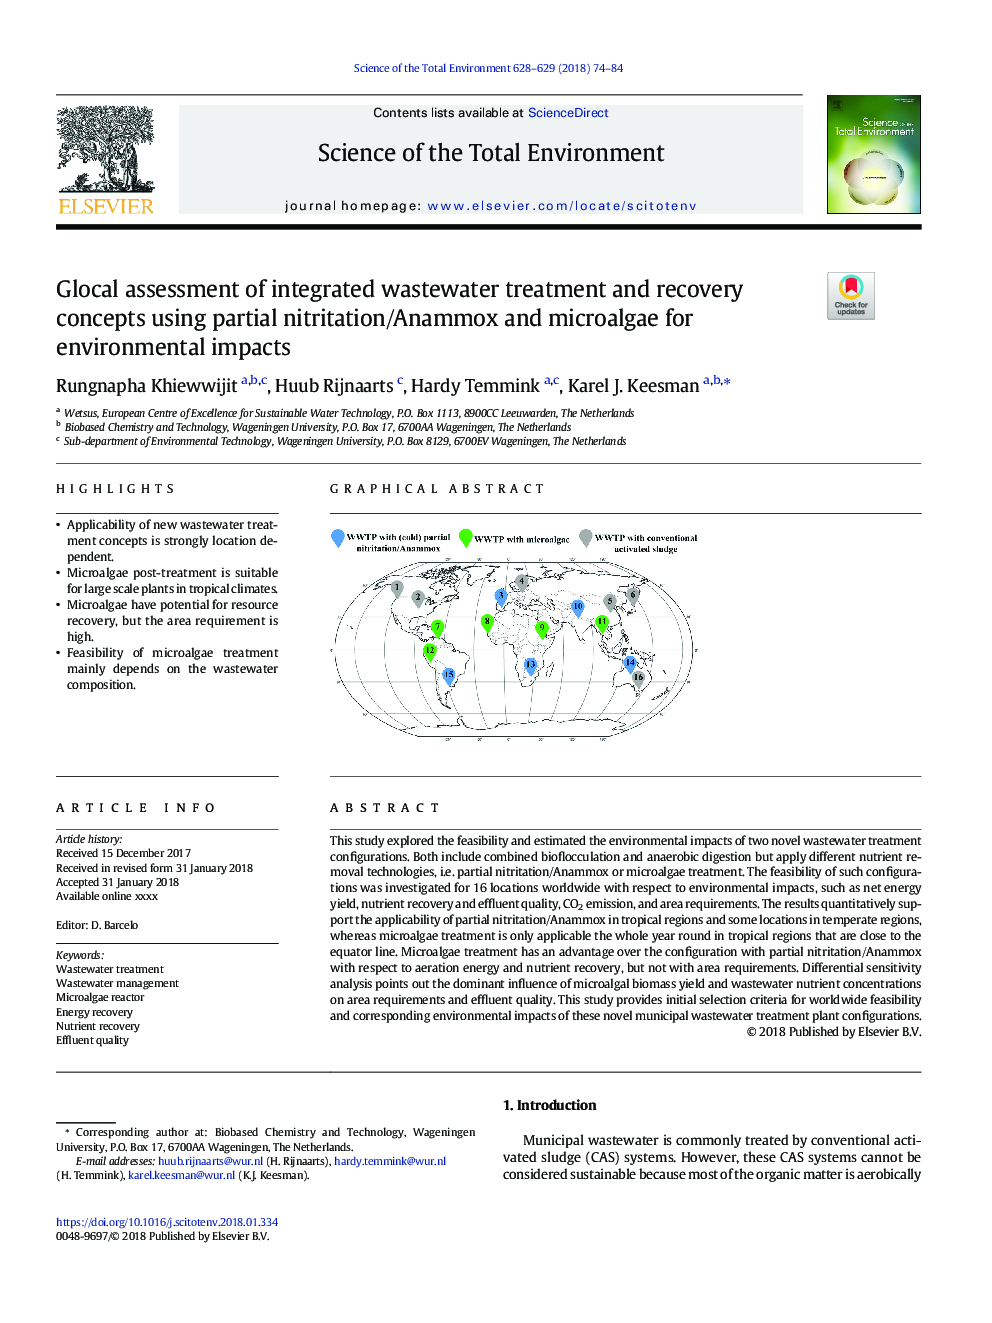 Glocal assessment of integrated wastewater treatment and recovery concepts using partial nitritation/Anammox and microalgae for environmental impacts